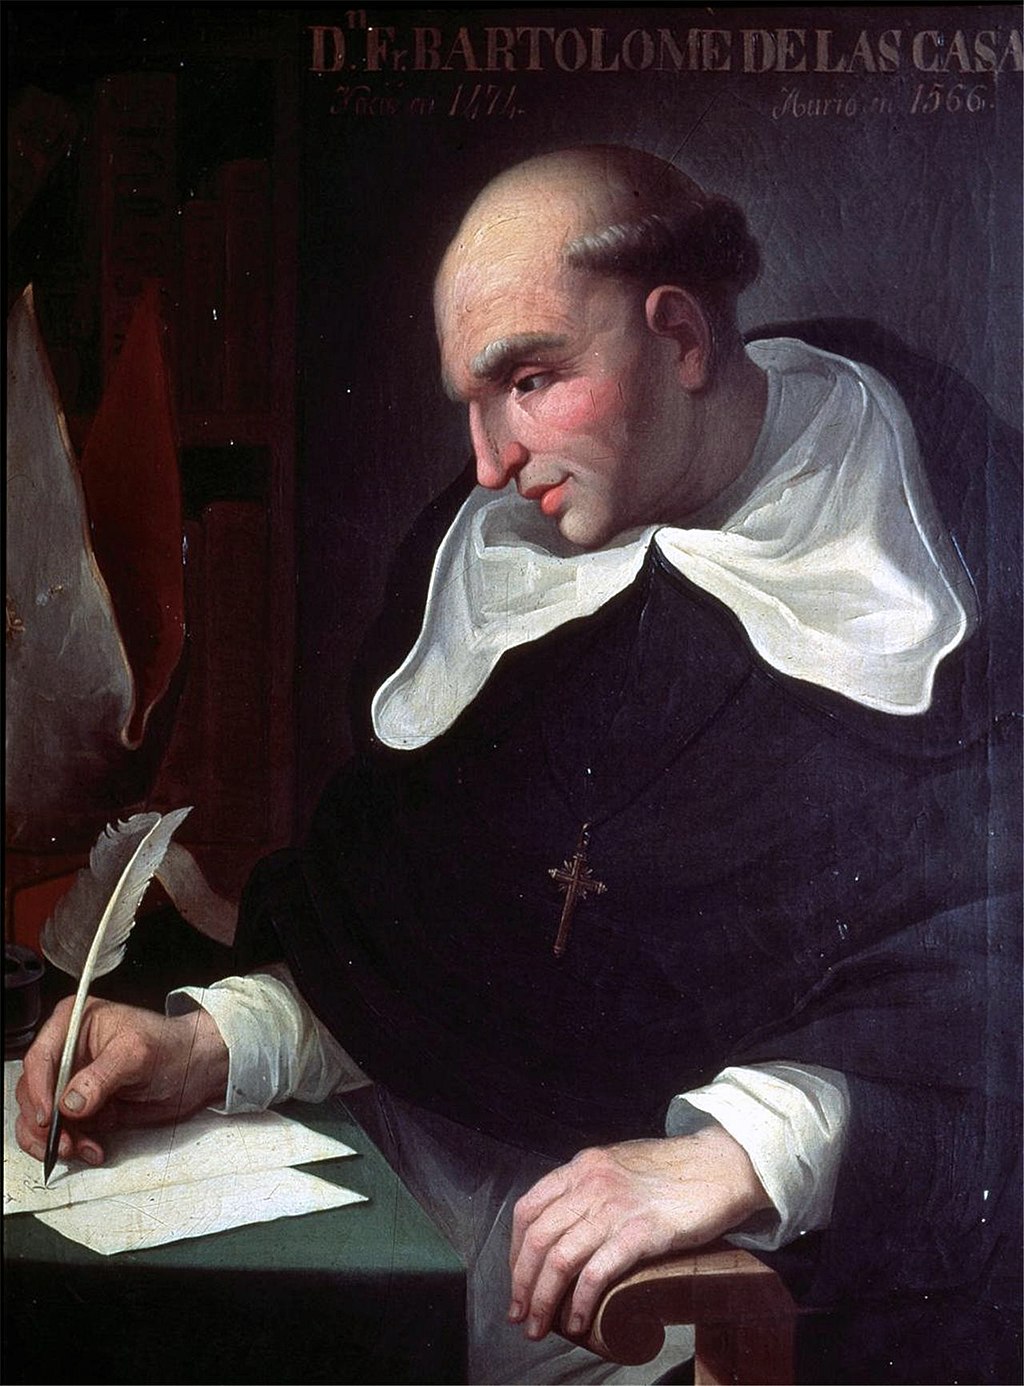 Painting of a friar in a black robe, writing with a quill.